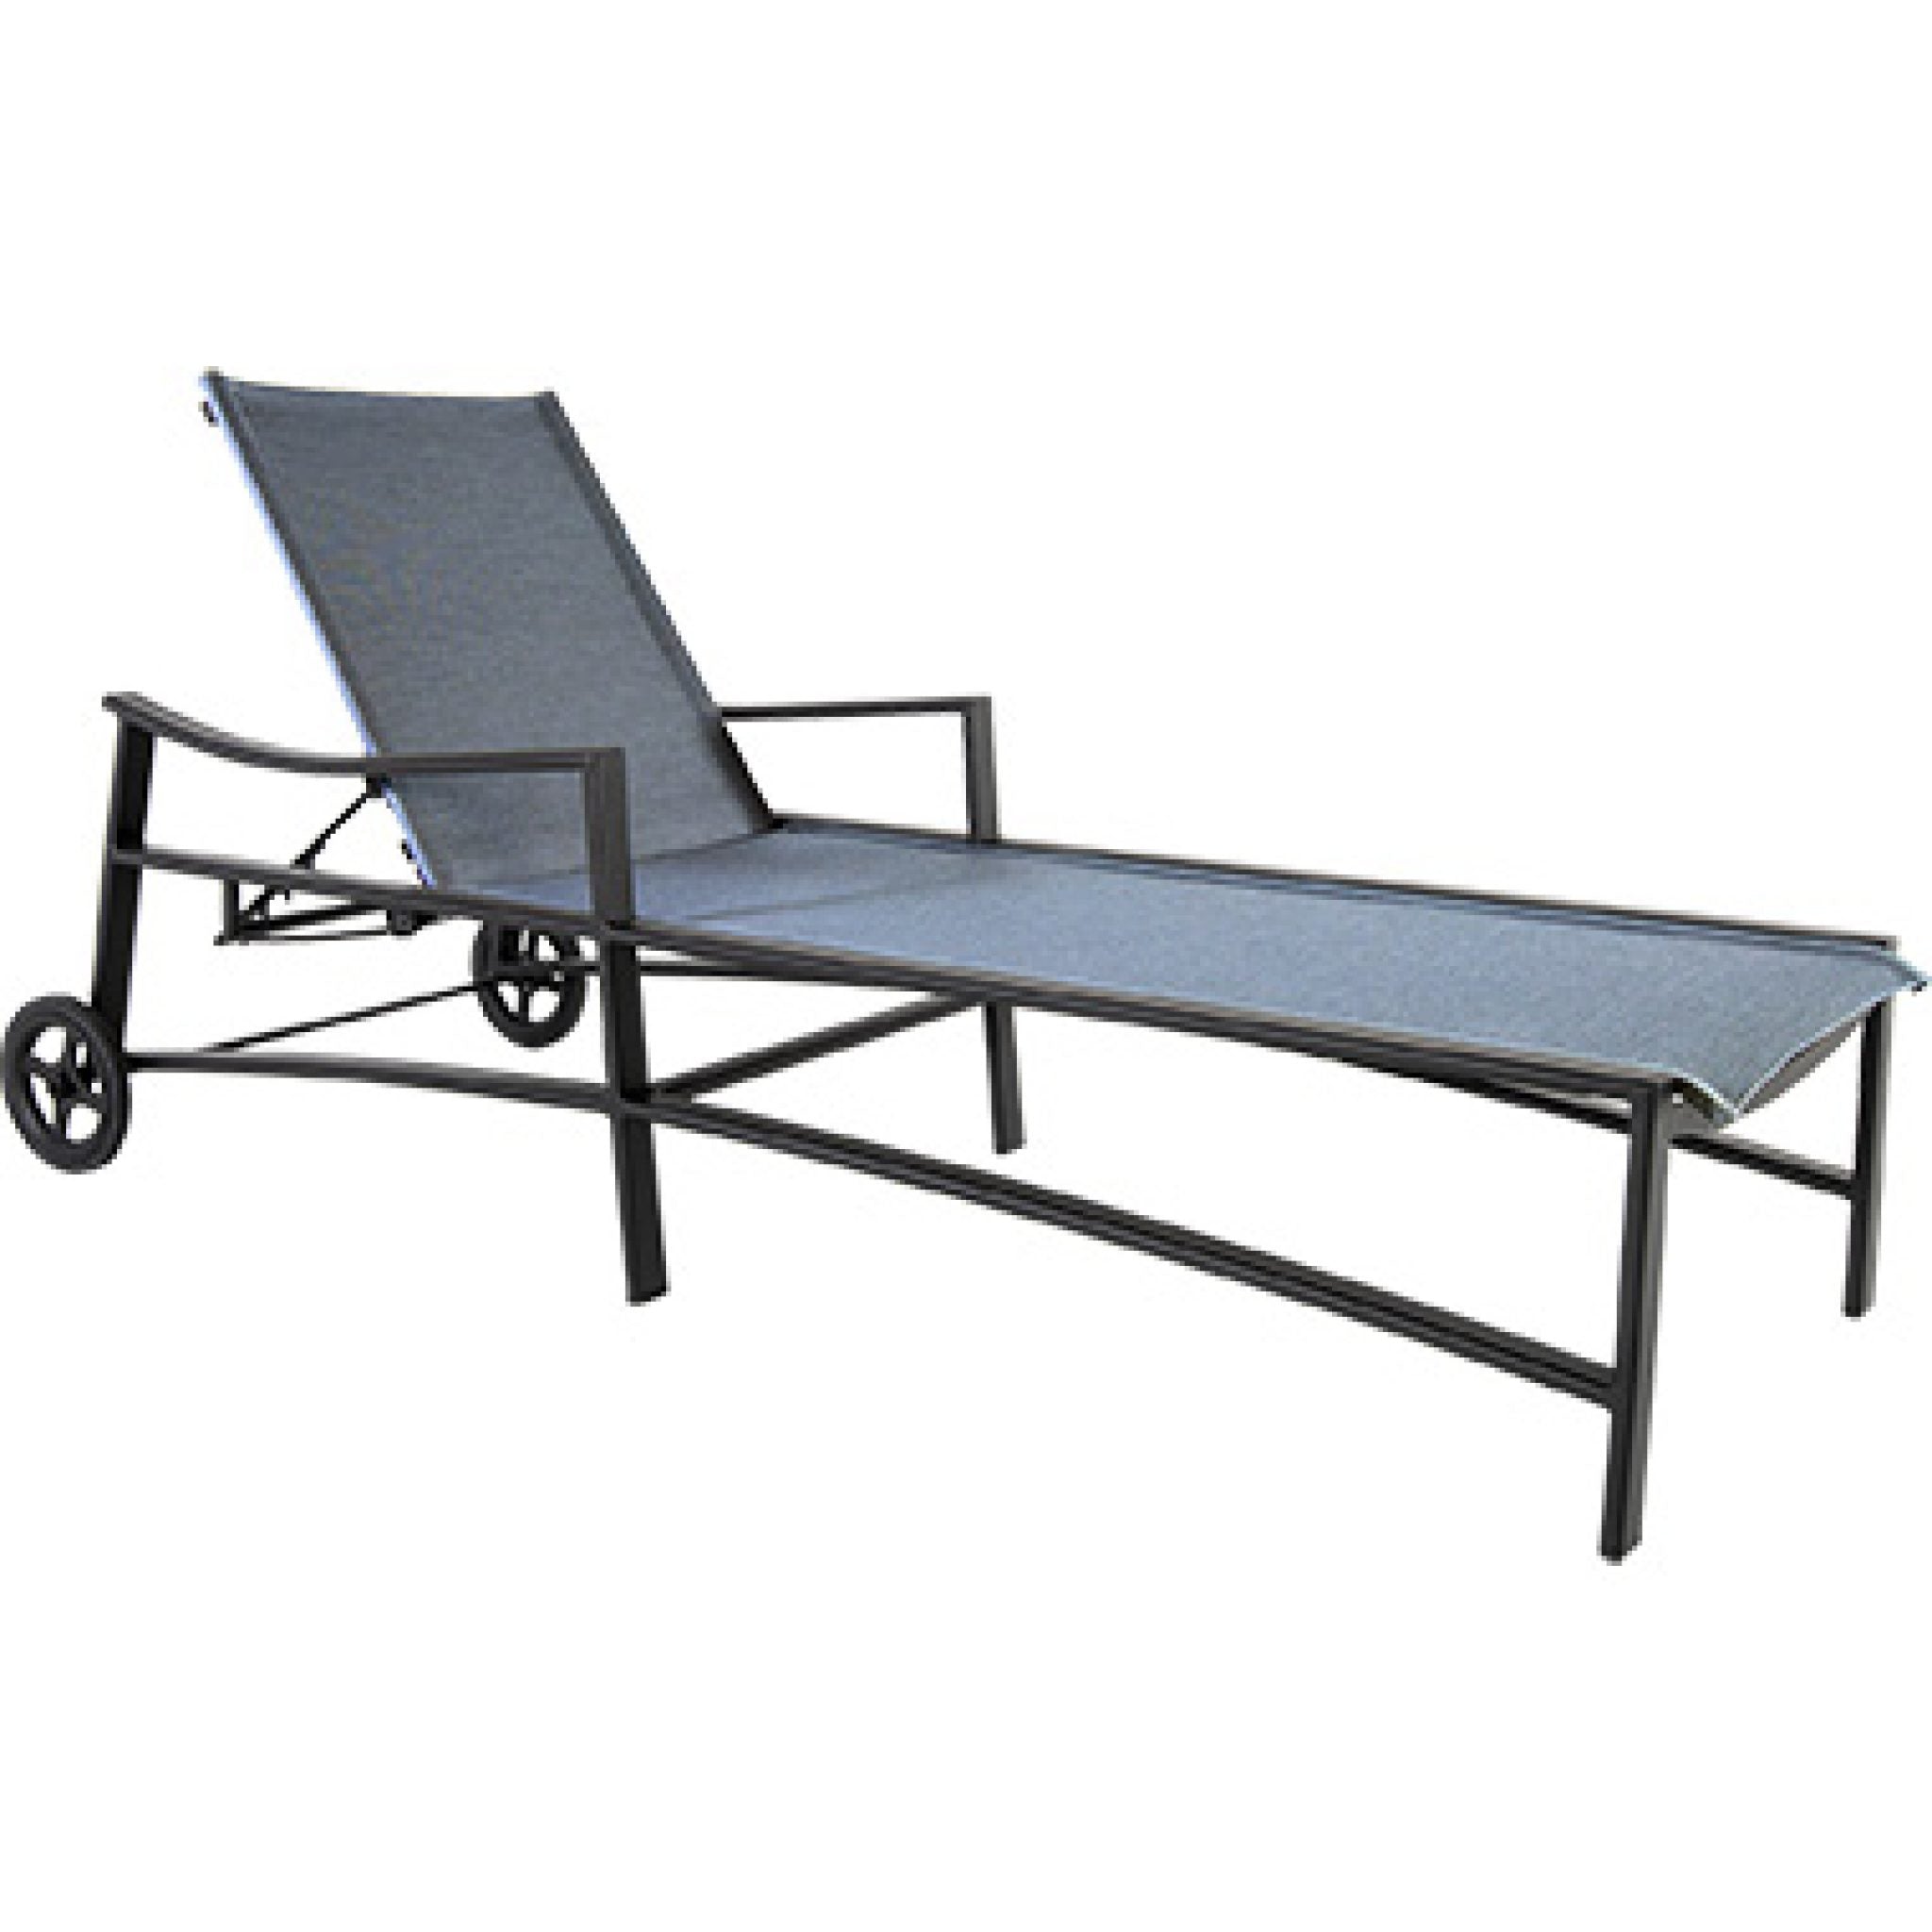 Avana Sling Adjustable Chaise with Wheels by Ow Lee